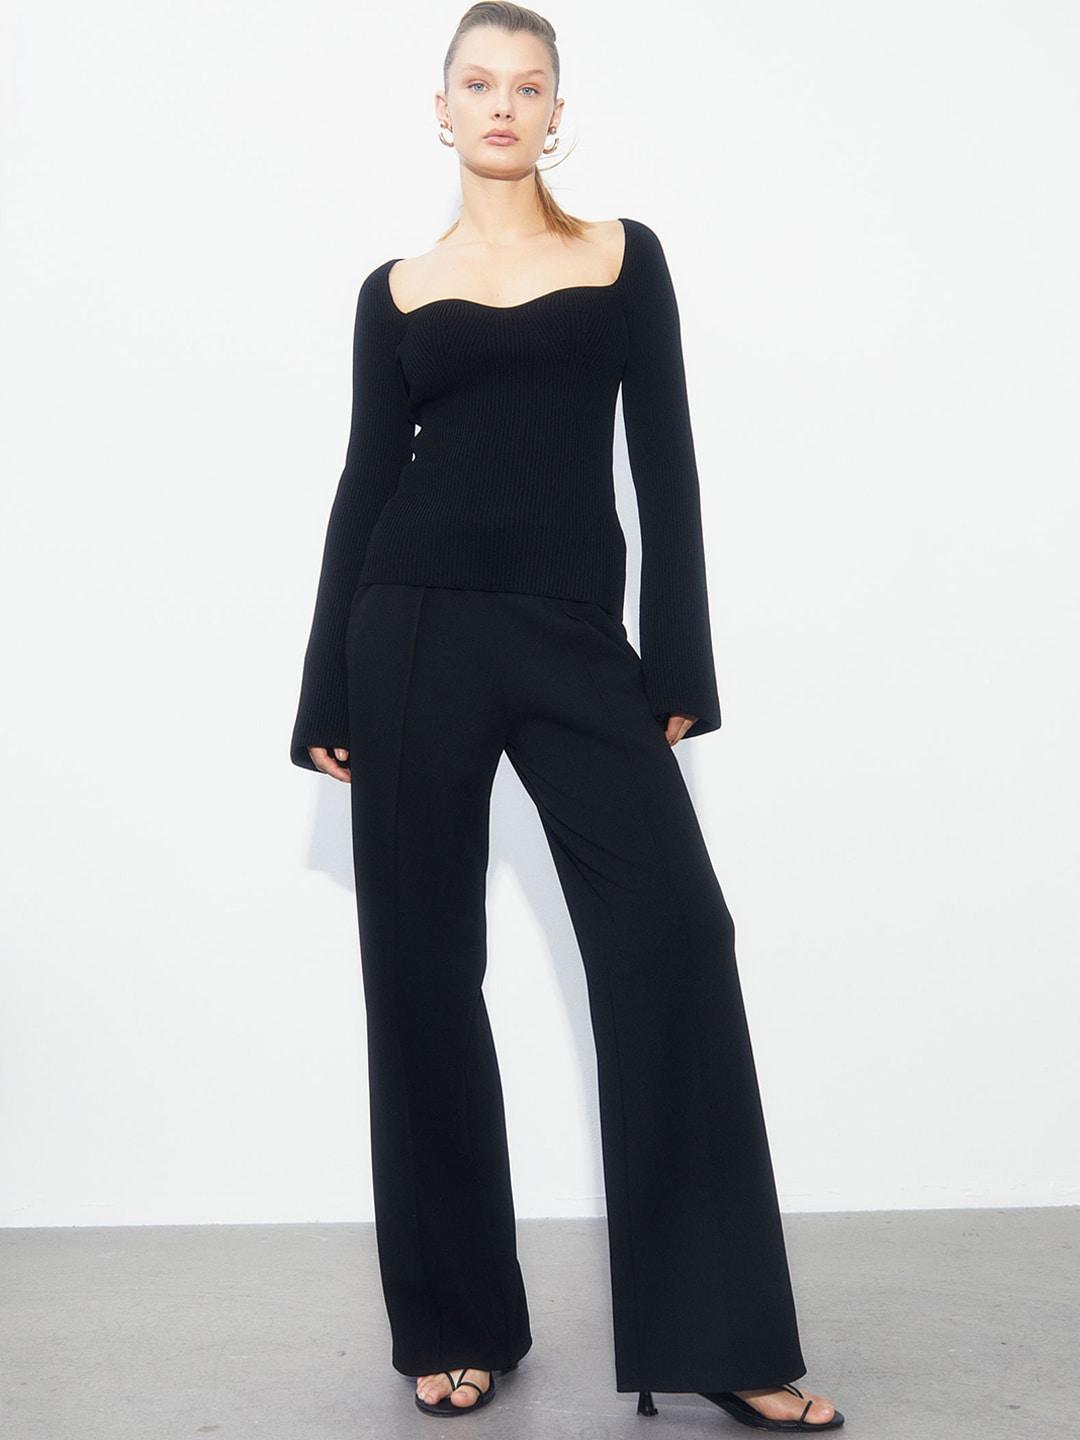 h&m-women-black-high-waisted-tailored-trousers